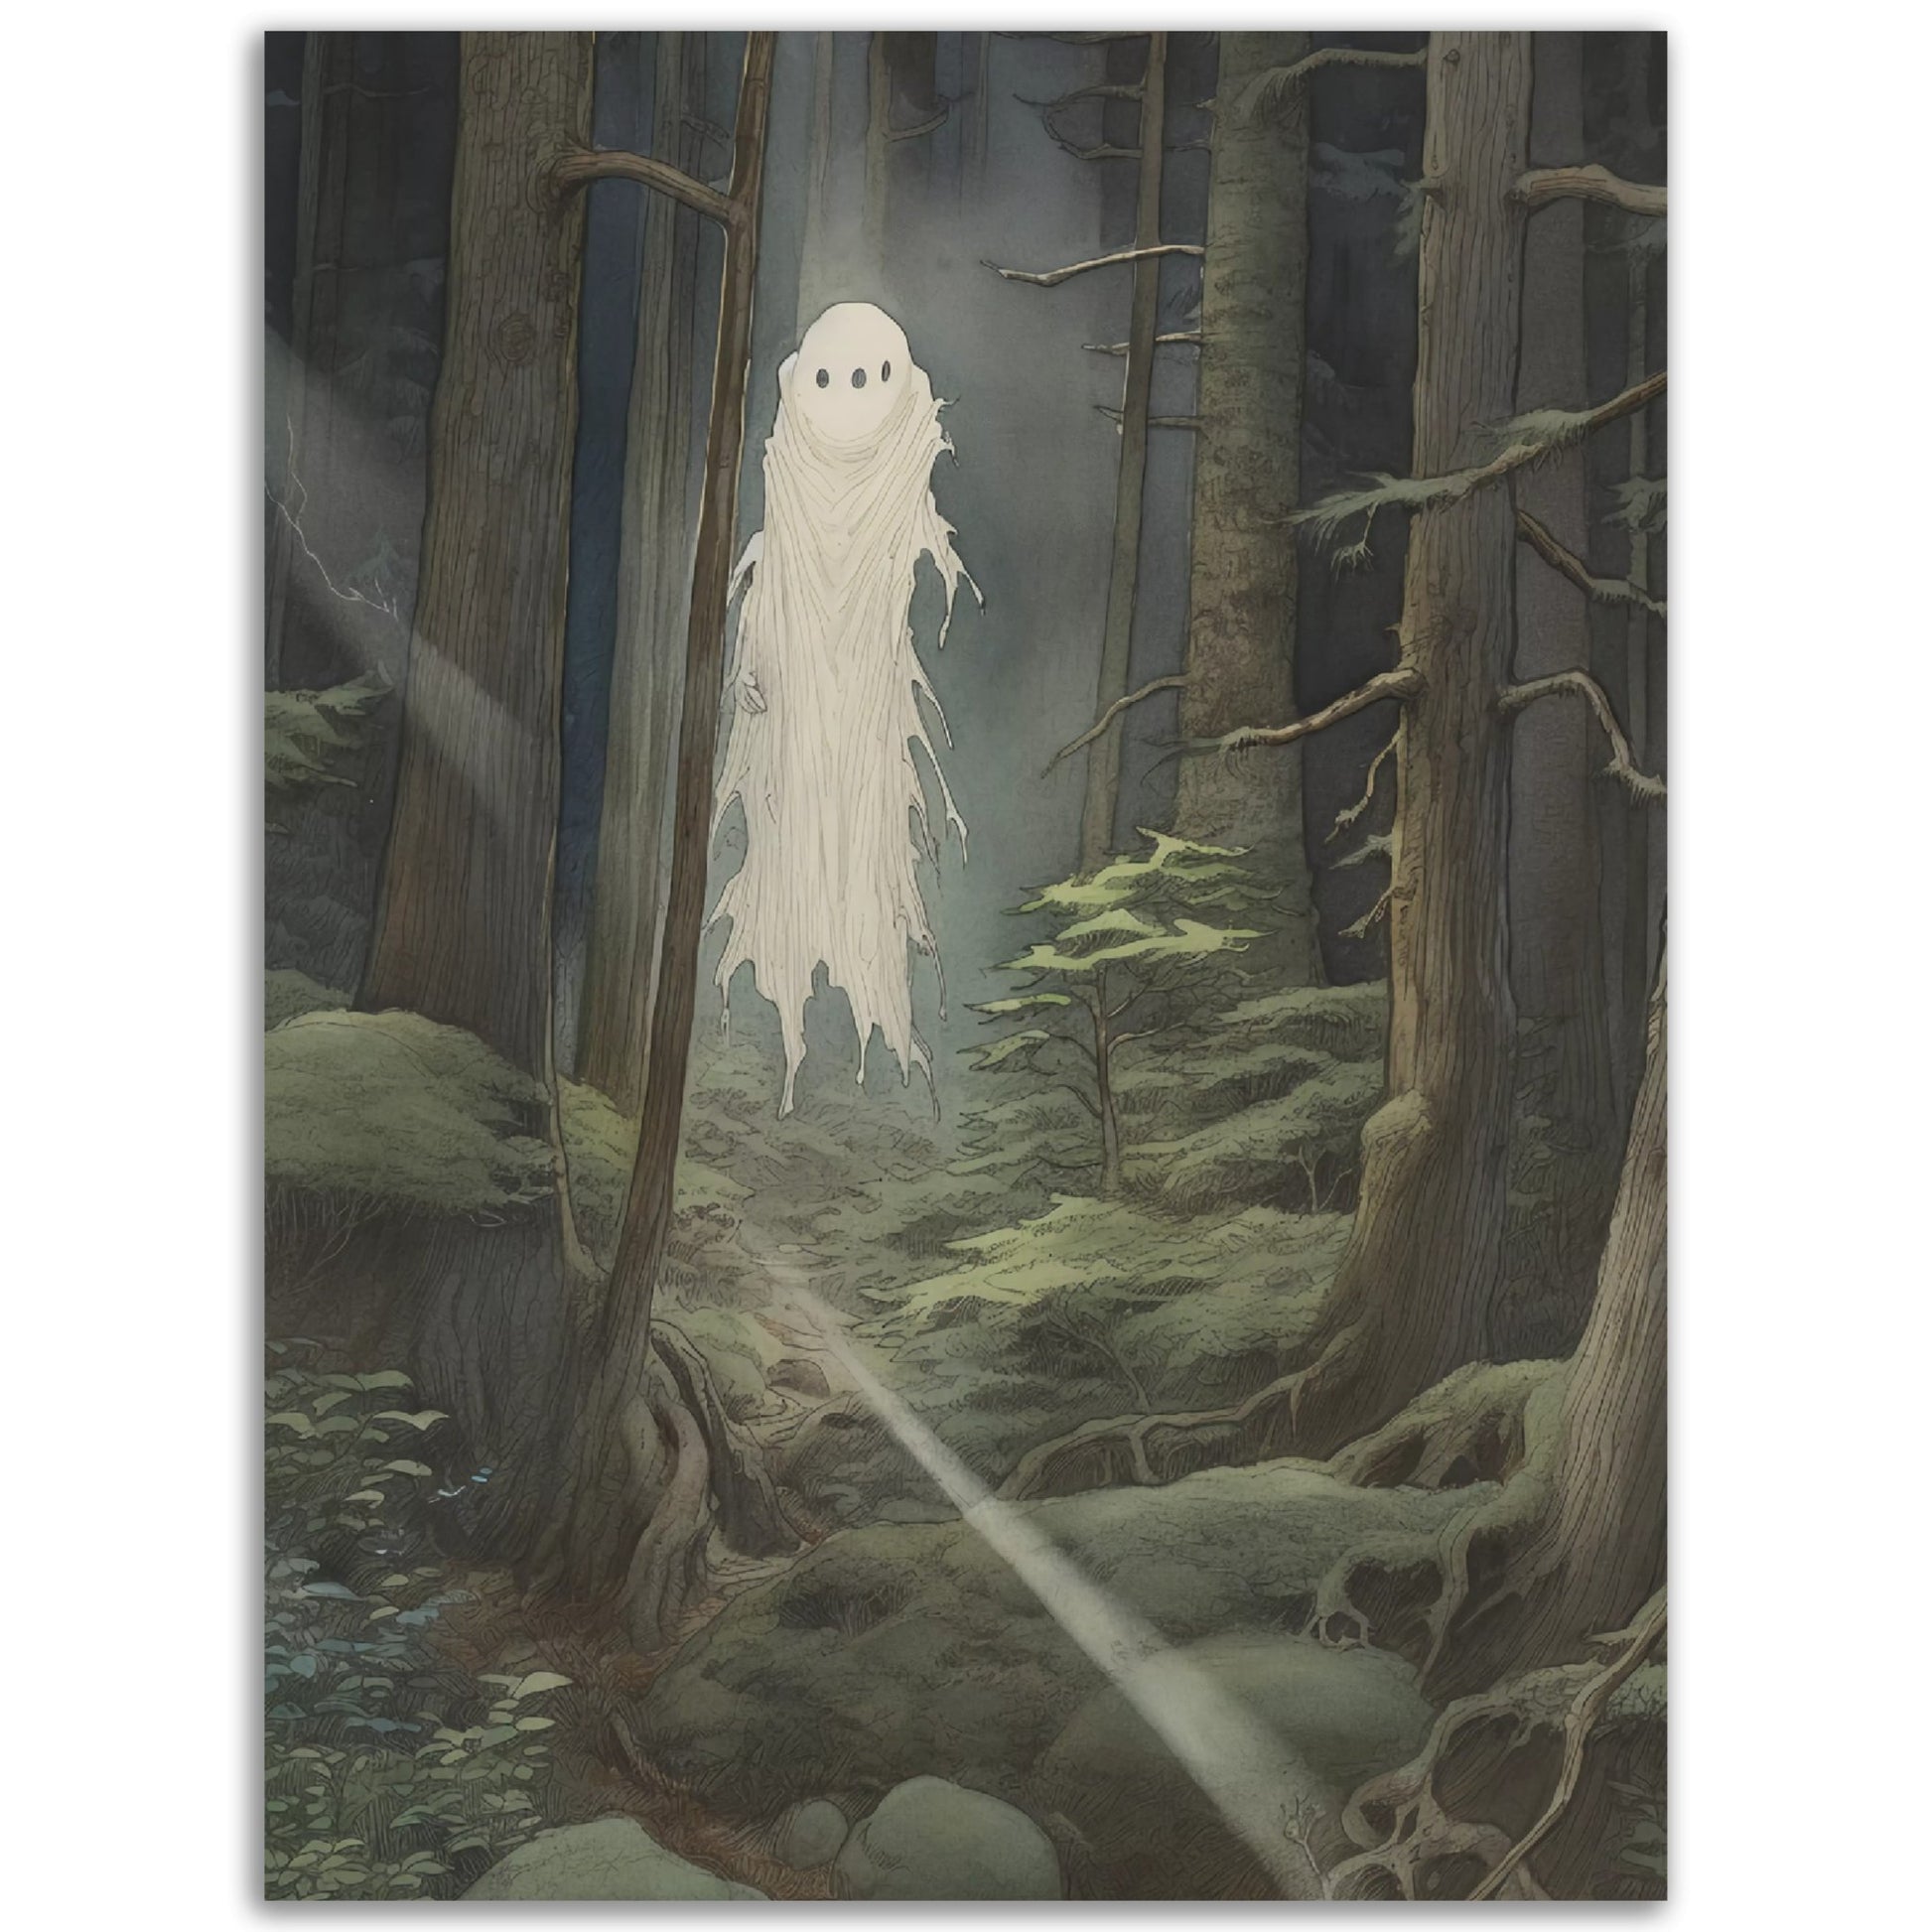 A Kodama Forest Spirit 4 wall art poster depicting a ghost in the woods.